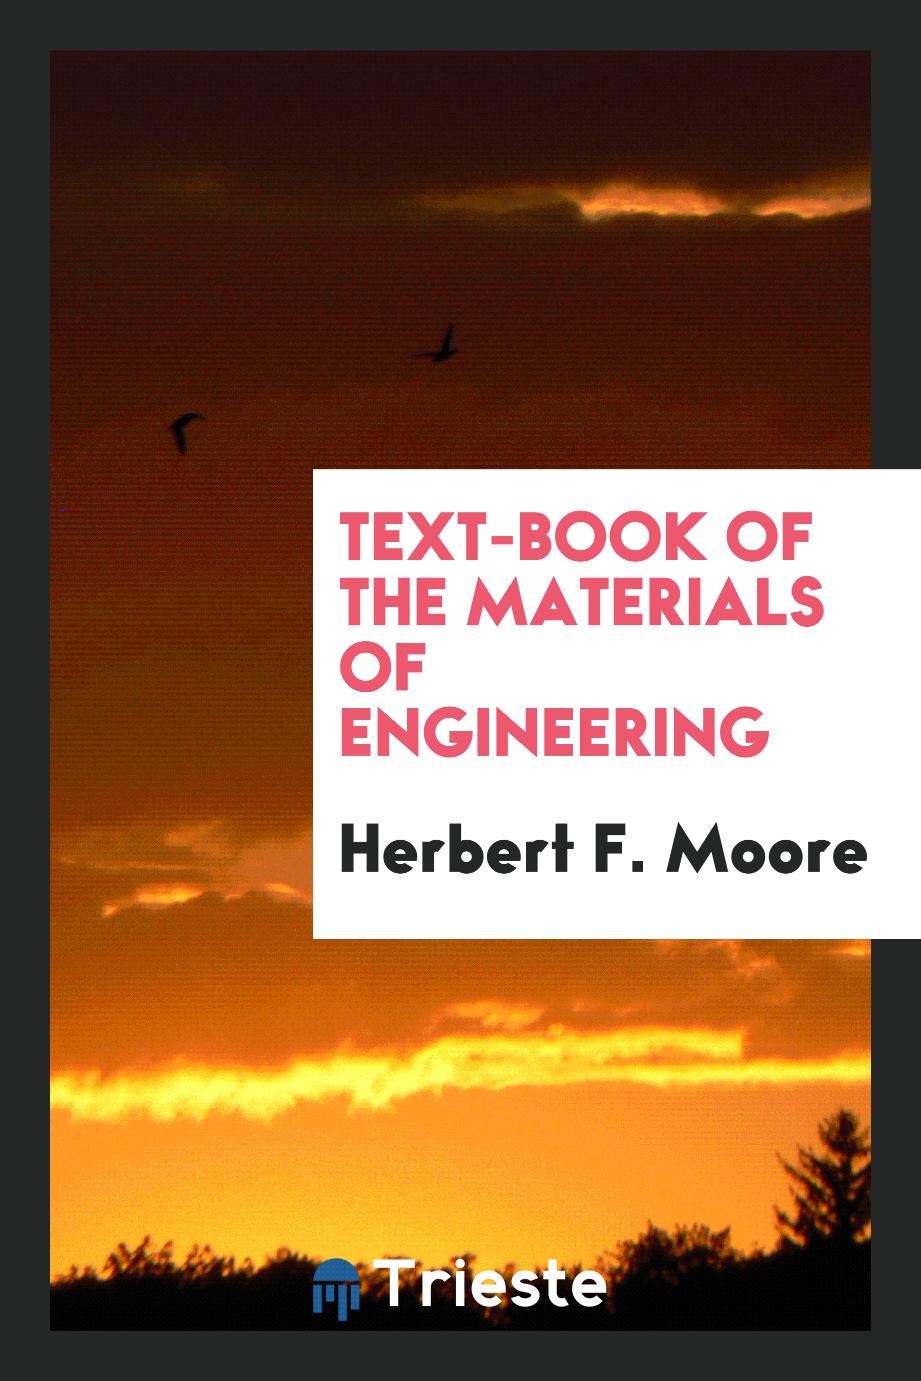 Text-Book of the Materials of Engineering